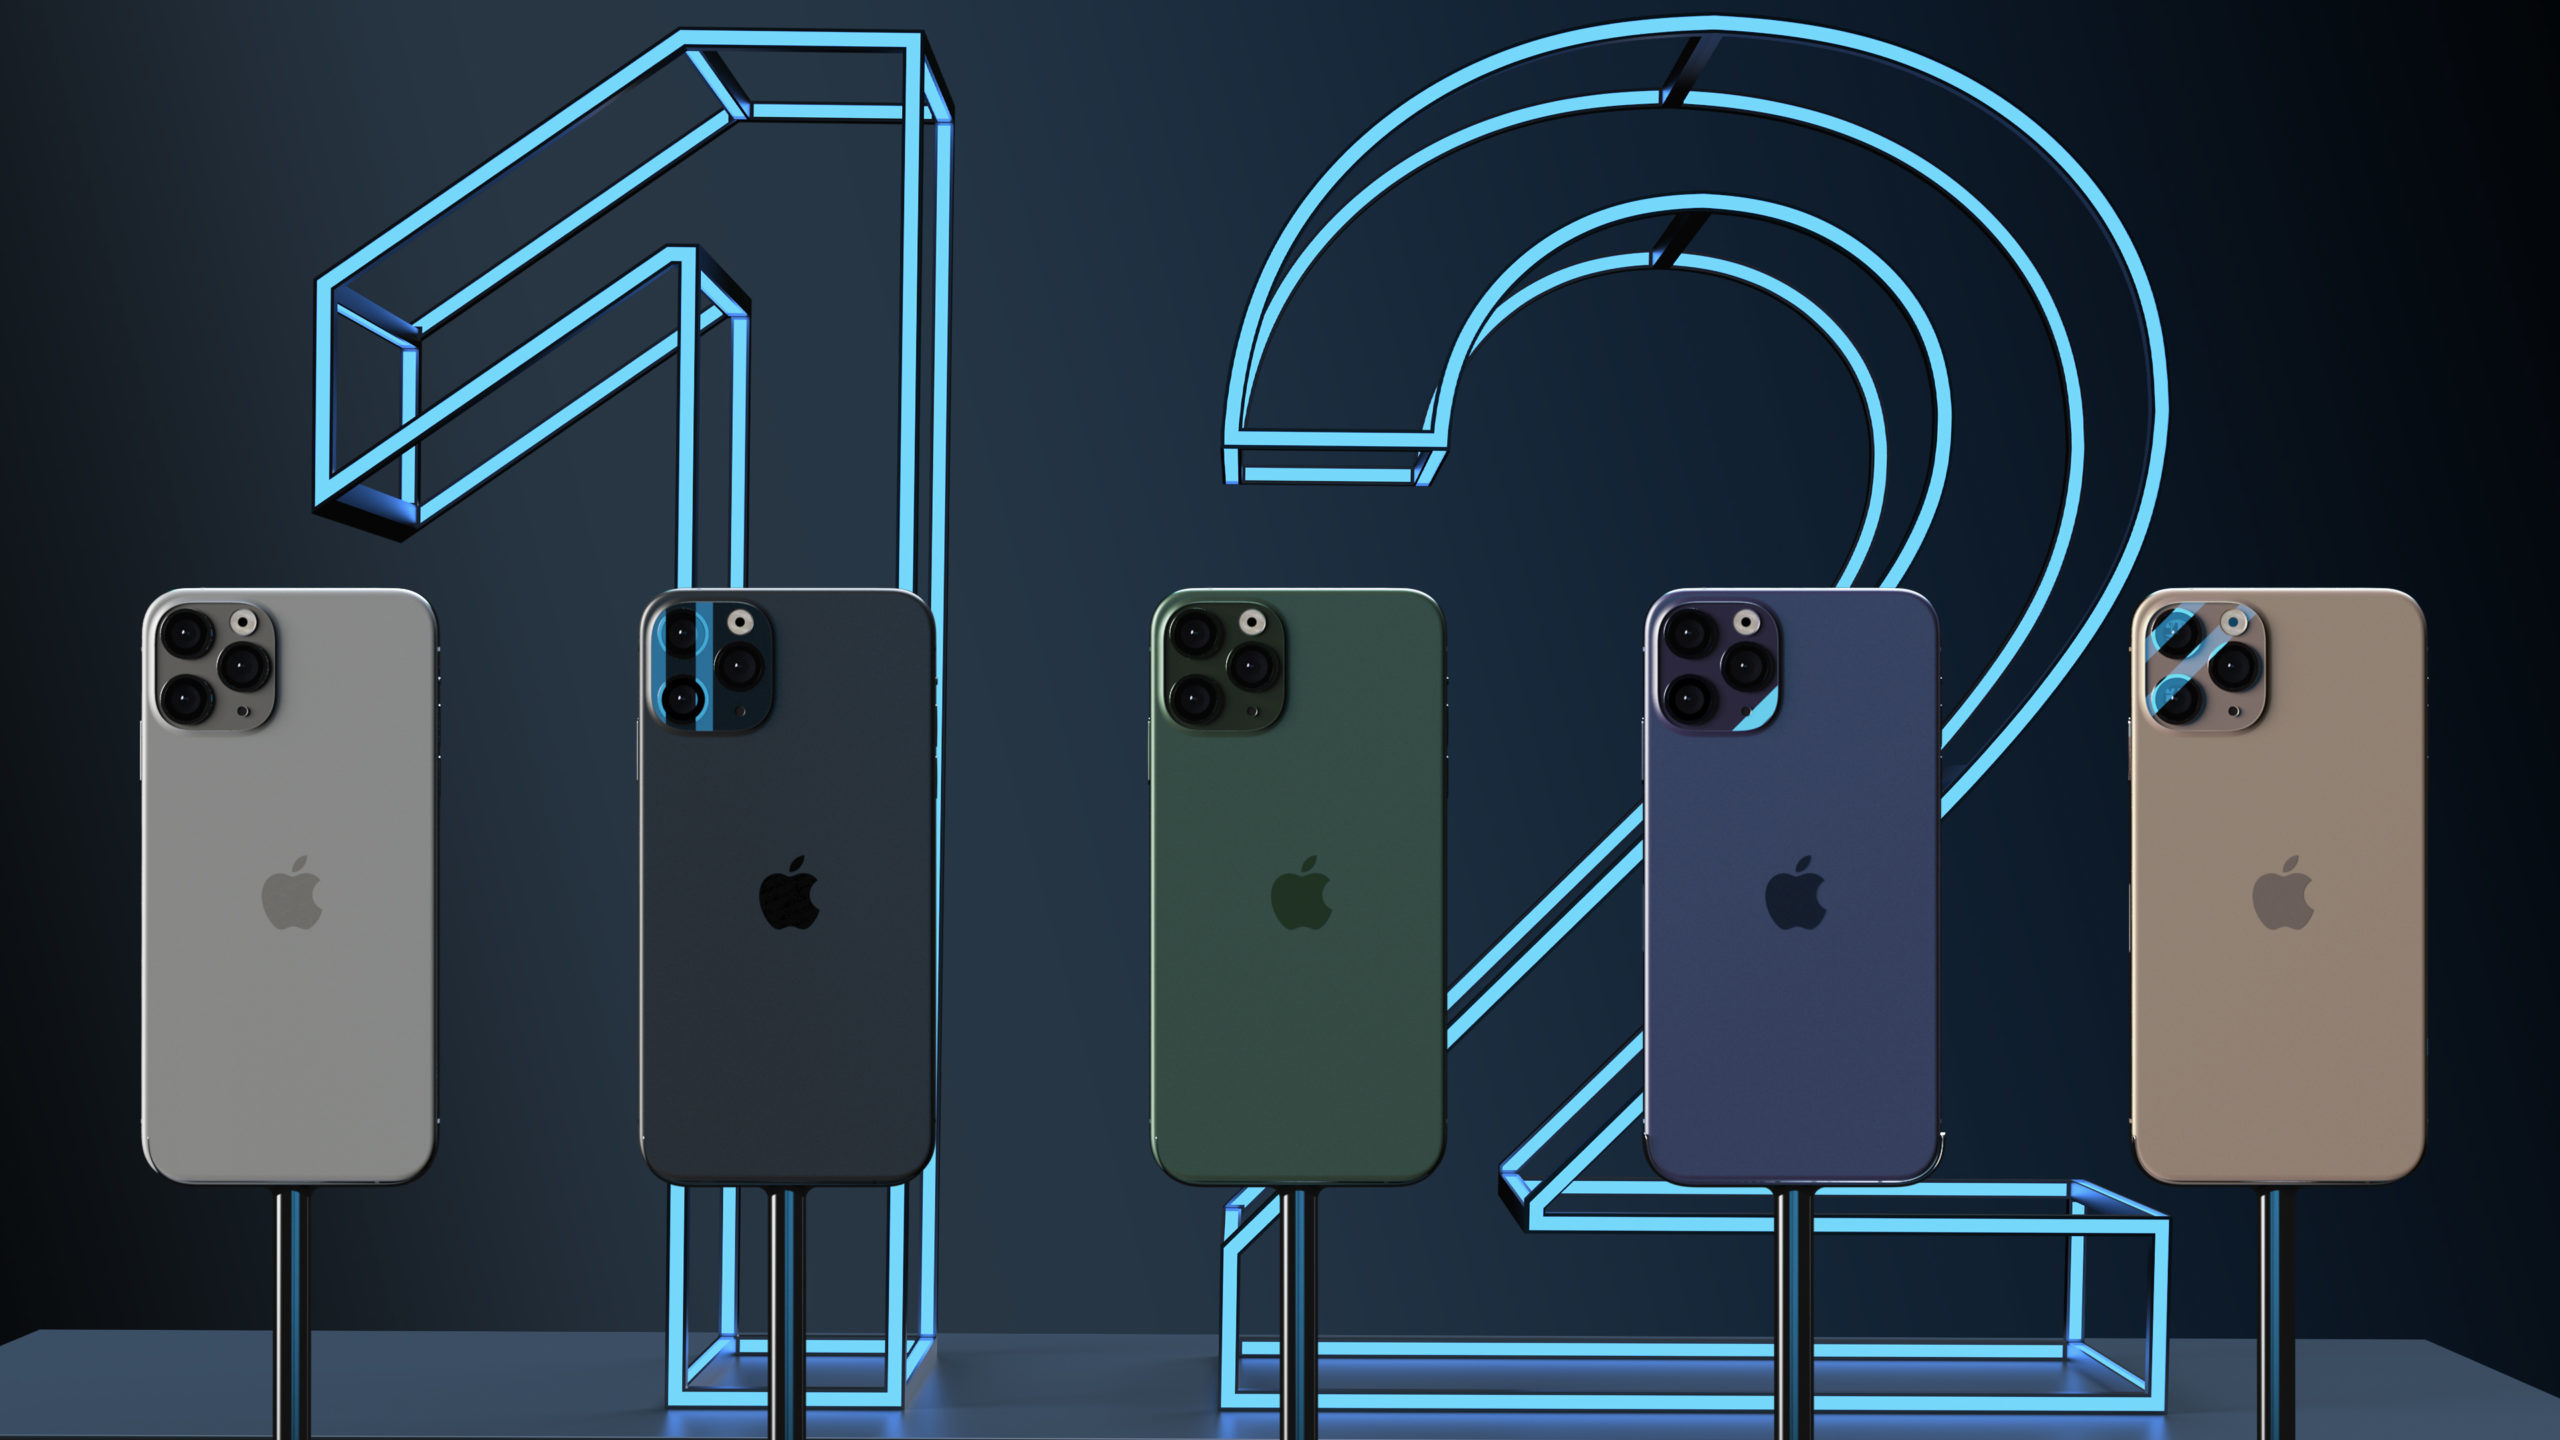 ‘iPhone 12 Pro’ Models Could Be Capable of Shooting 4K Video at 120fps and 240fps